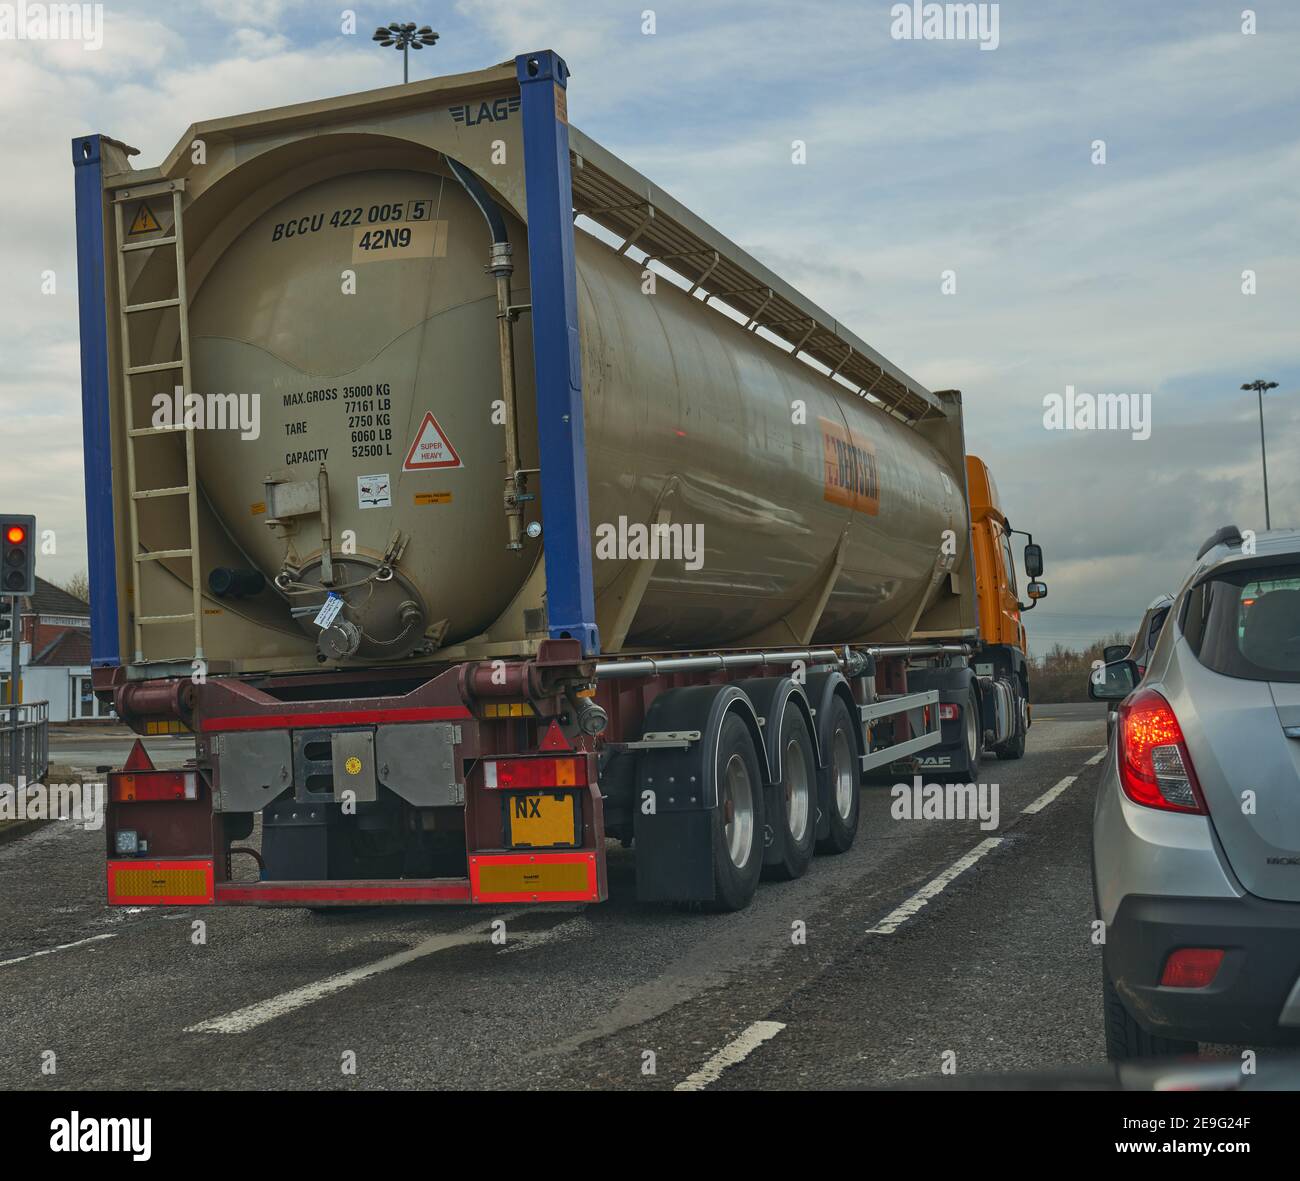 Tanker truck stopped at red traffic lights Stock Photo